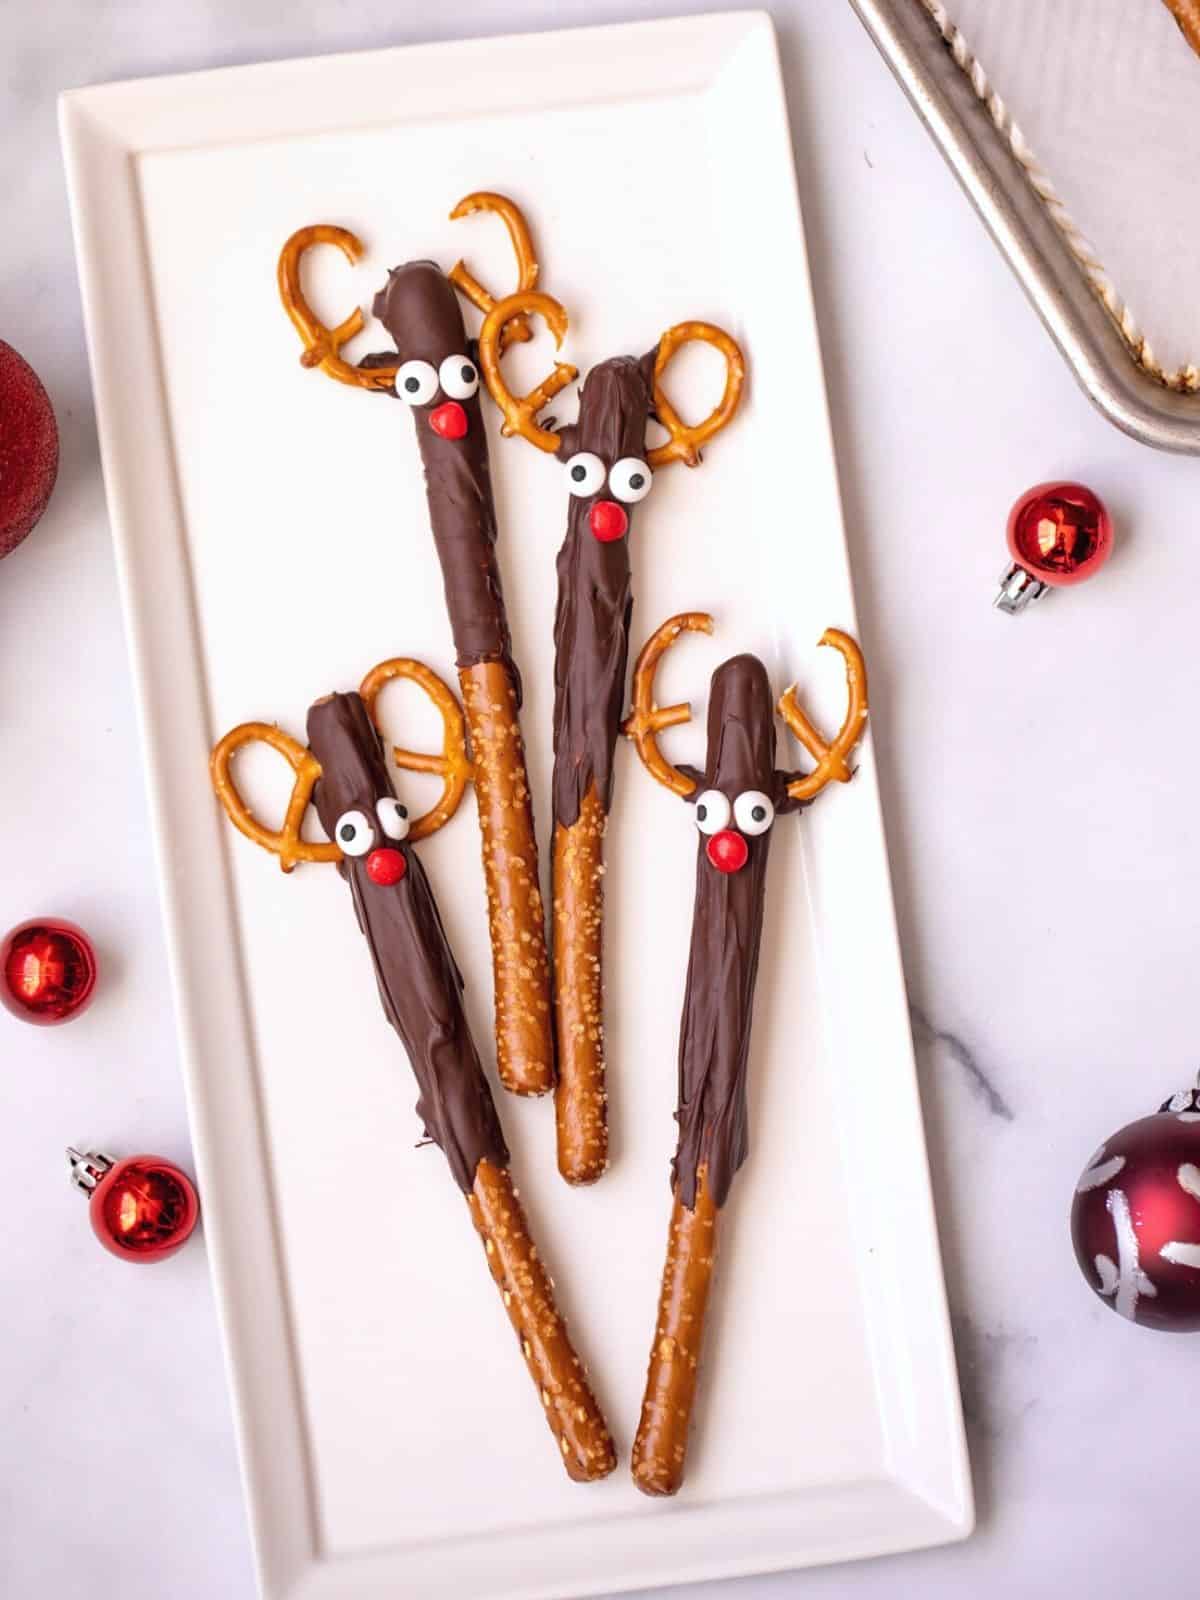 4 chocolate covered pretzels decorated to look like Rudolph on a white platter. 